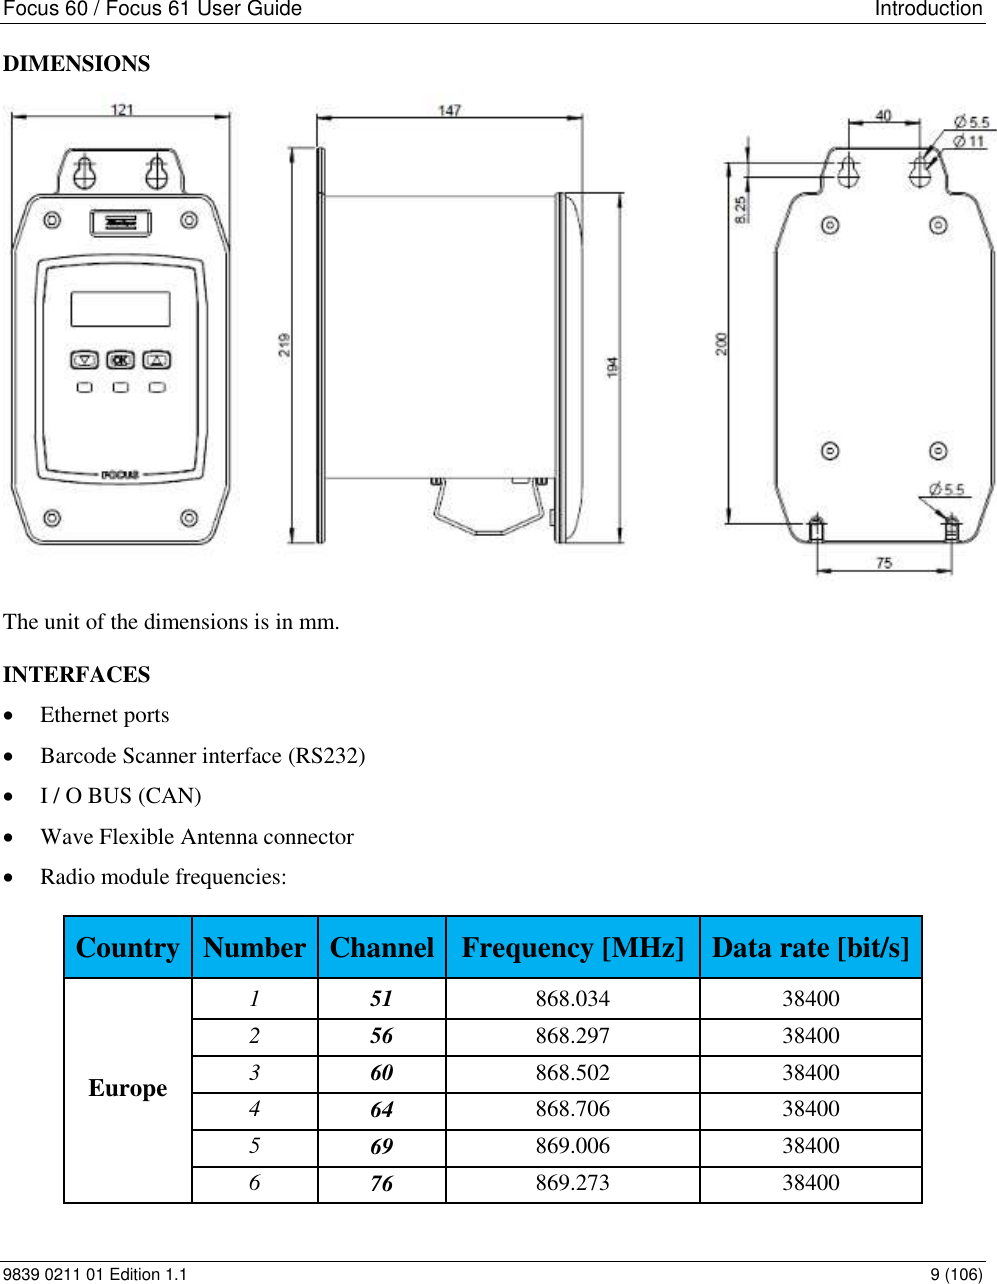 Focus 60 / Focus 61 User Guide   Introduction 9839 0211 01 Edition 1.1    9 (106) DIMENSIONS  The unit of the dimensions is in mm.  INTERFACES  Ethernet ports  Barcode Scanner interface (RS232)  I / O BUS (CAN)  Wave Flexible Antenna connector  Radio module frequencies: Country Number Channel Frequency [MHz] Data rate [bit/s] Europe 1 51 868.034 38400 2 56 868.297 38400 3 60 868.502 38400 4 64 868.706 38400 5 69 869.006 38400 6 76 869.273 38400 